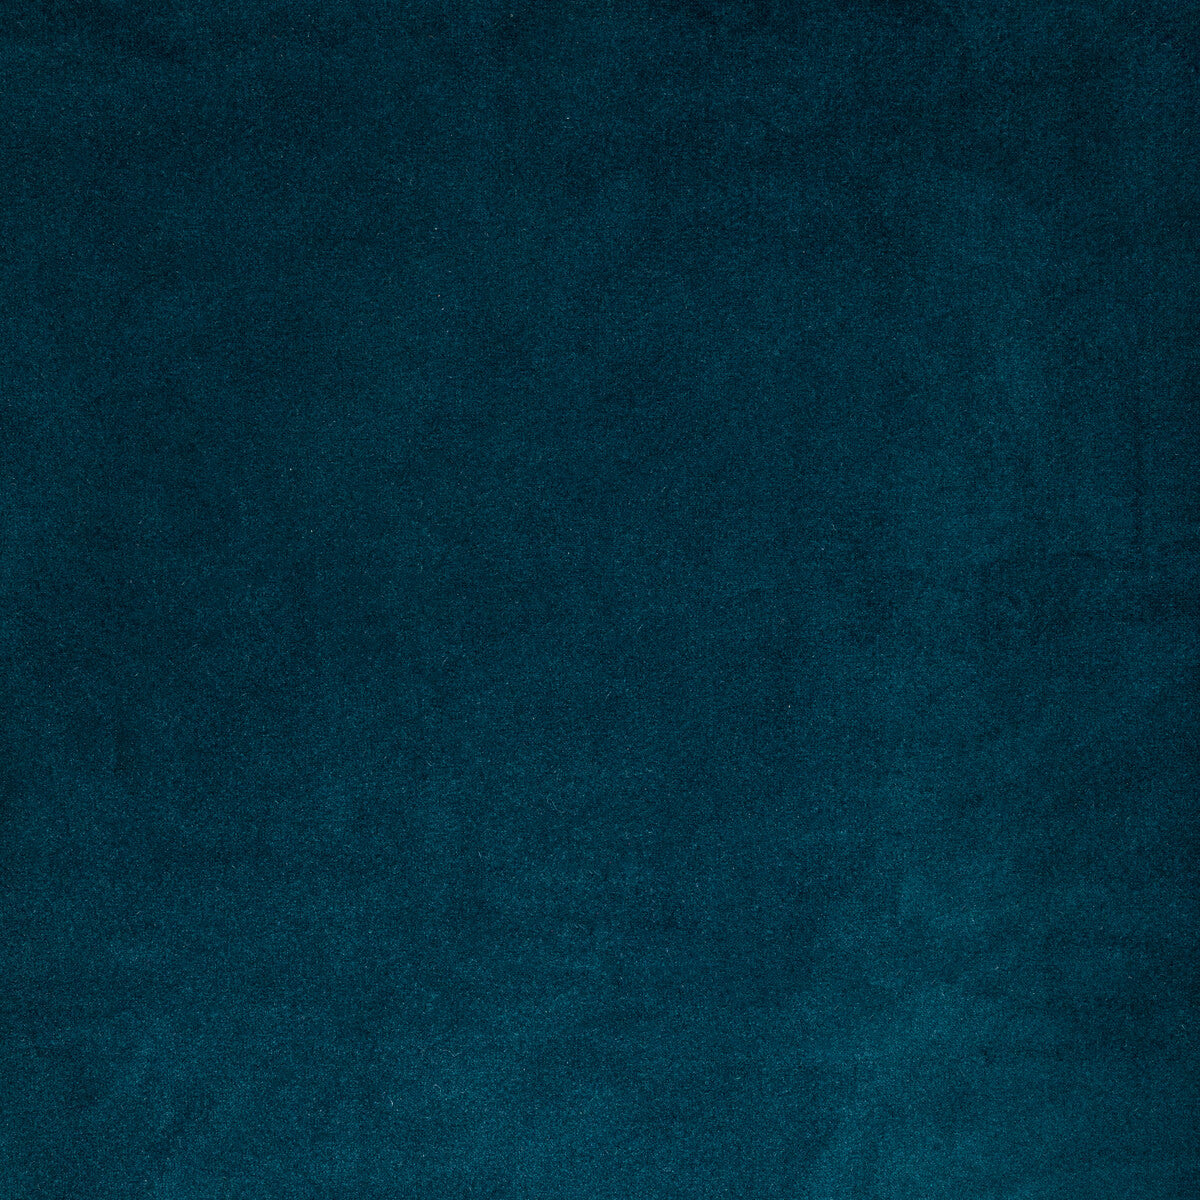 Rocco Velvet fabric in ink color - pattern 36652.5.0 - by Kravet Contract